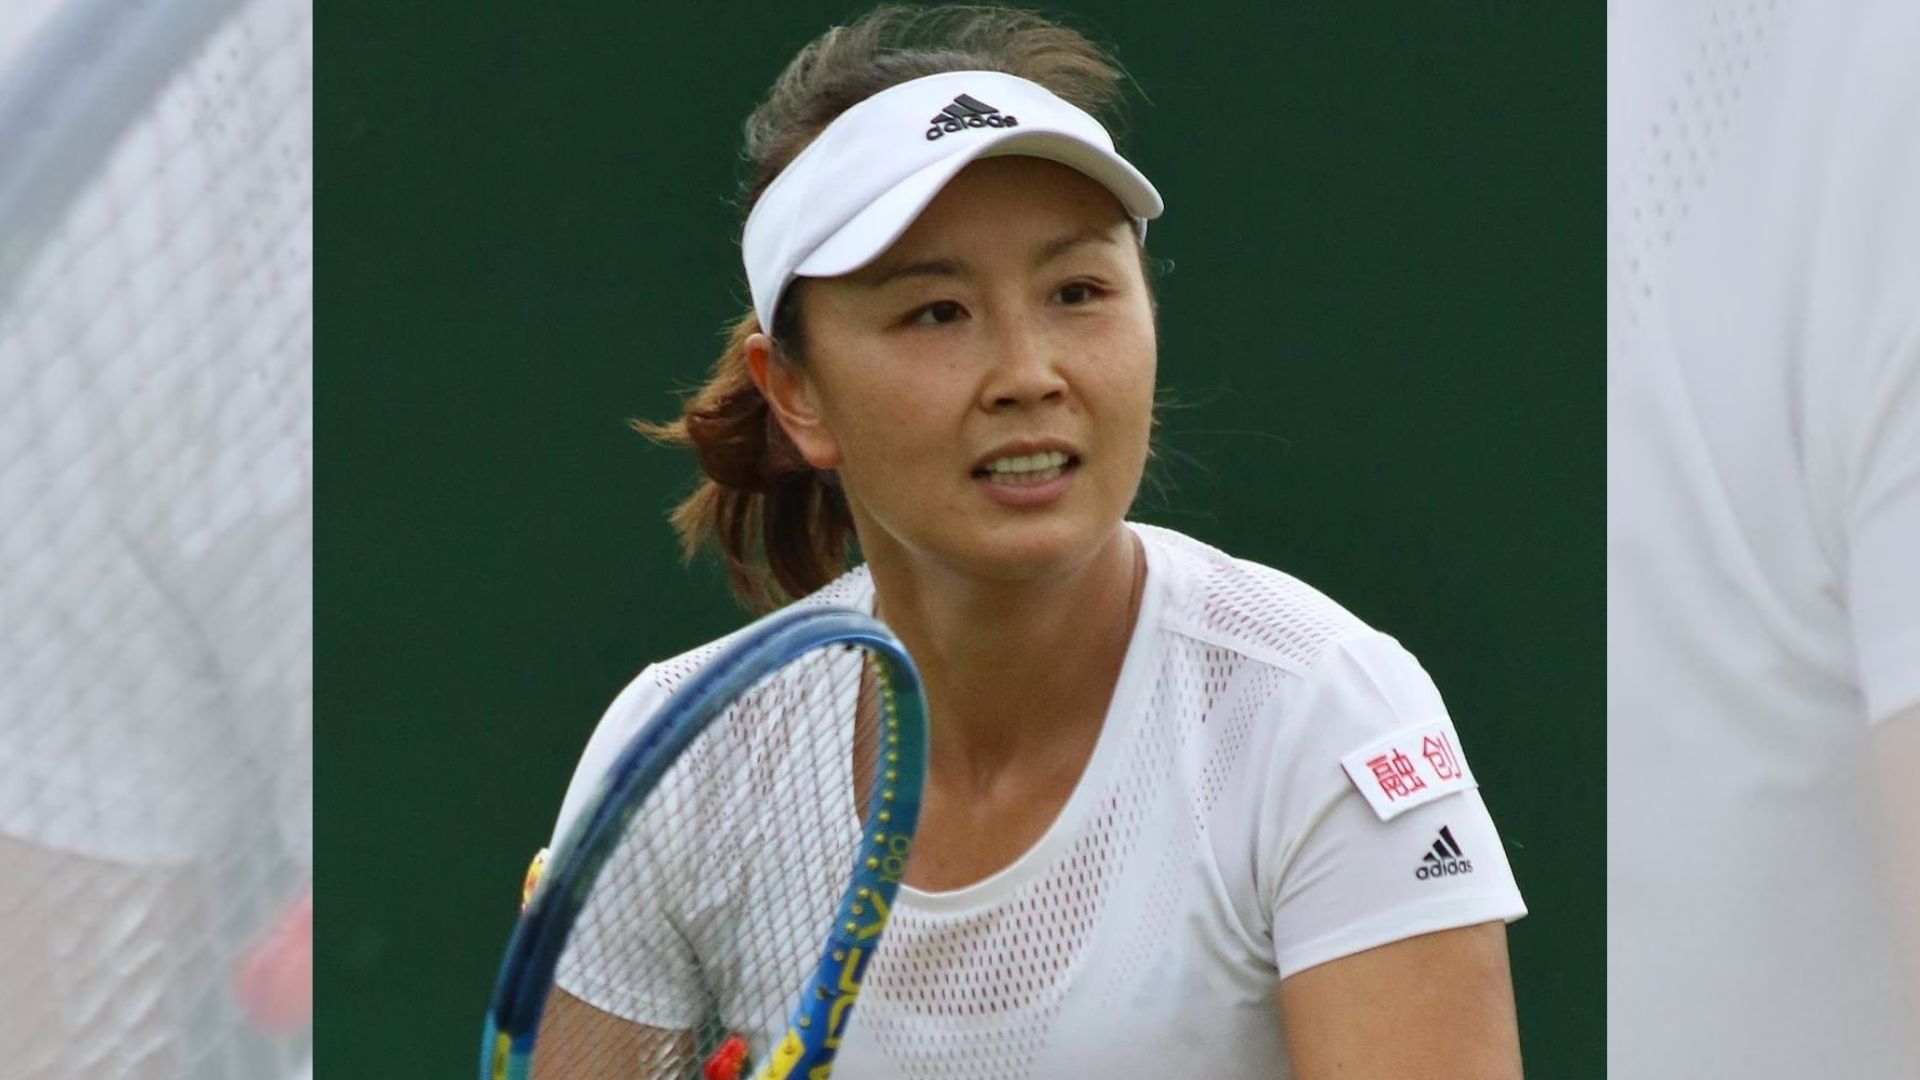 Peng Shuai As concerned about her well-being, she has withdrawn her accusation of sexual assault